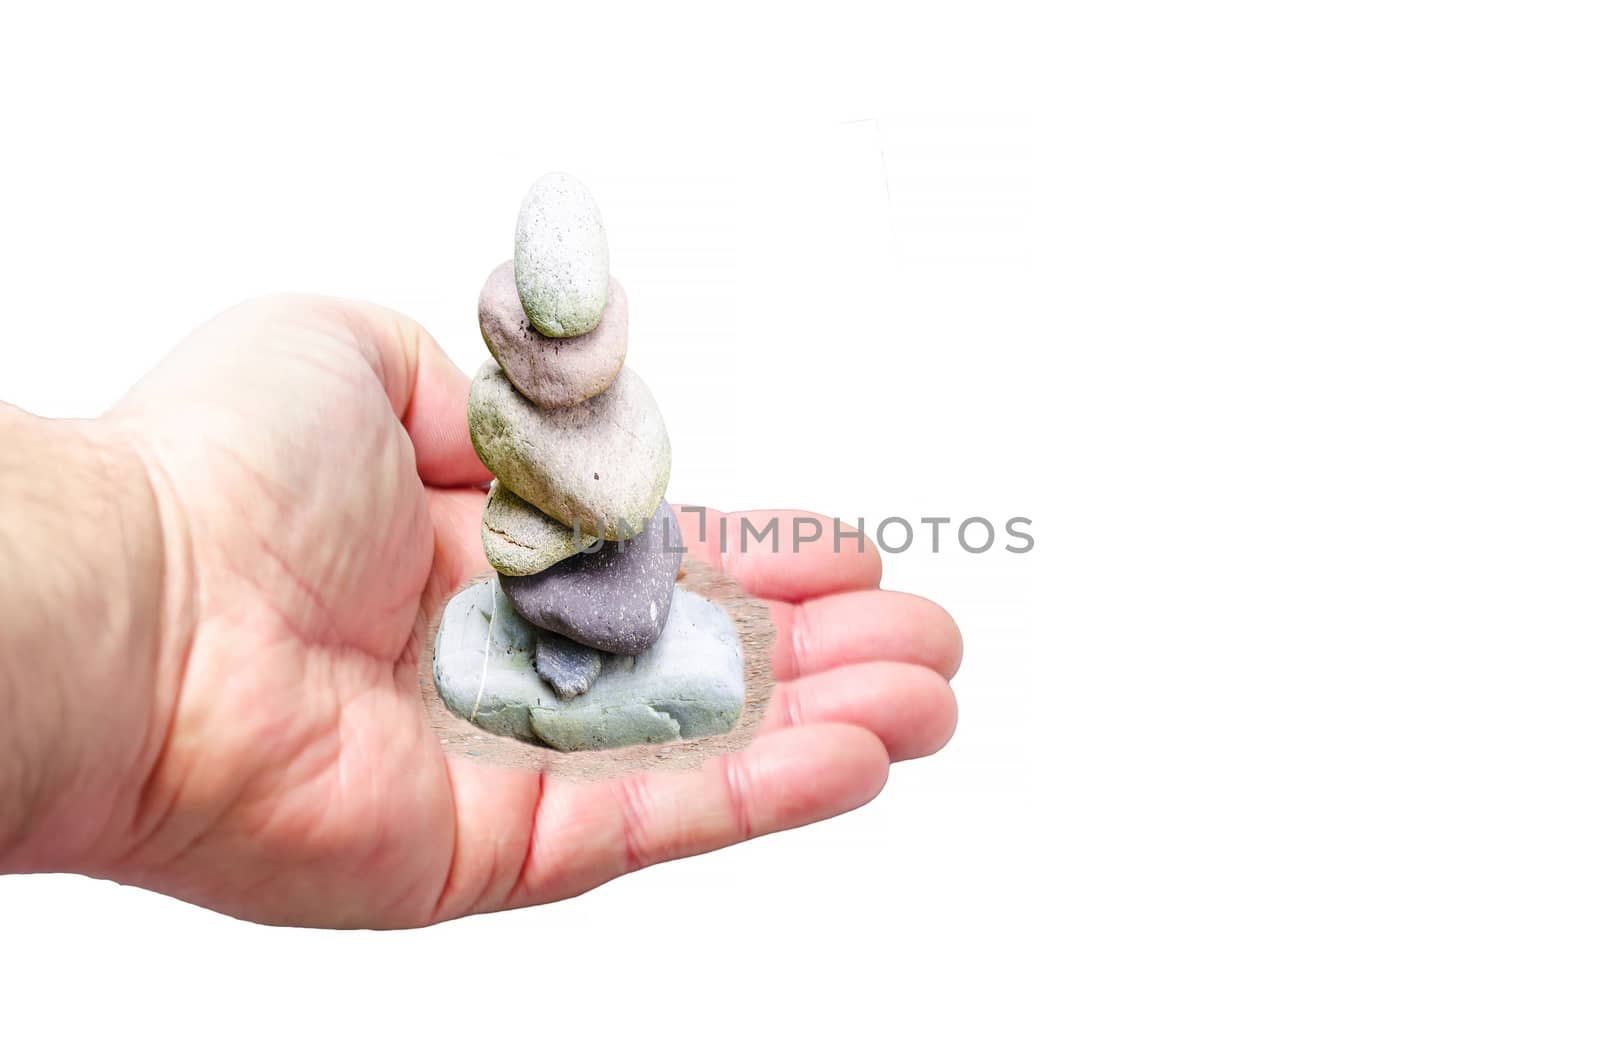 Gravel pile, small stone tower in hand. Symbol of balance and harmony.